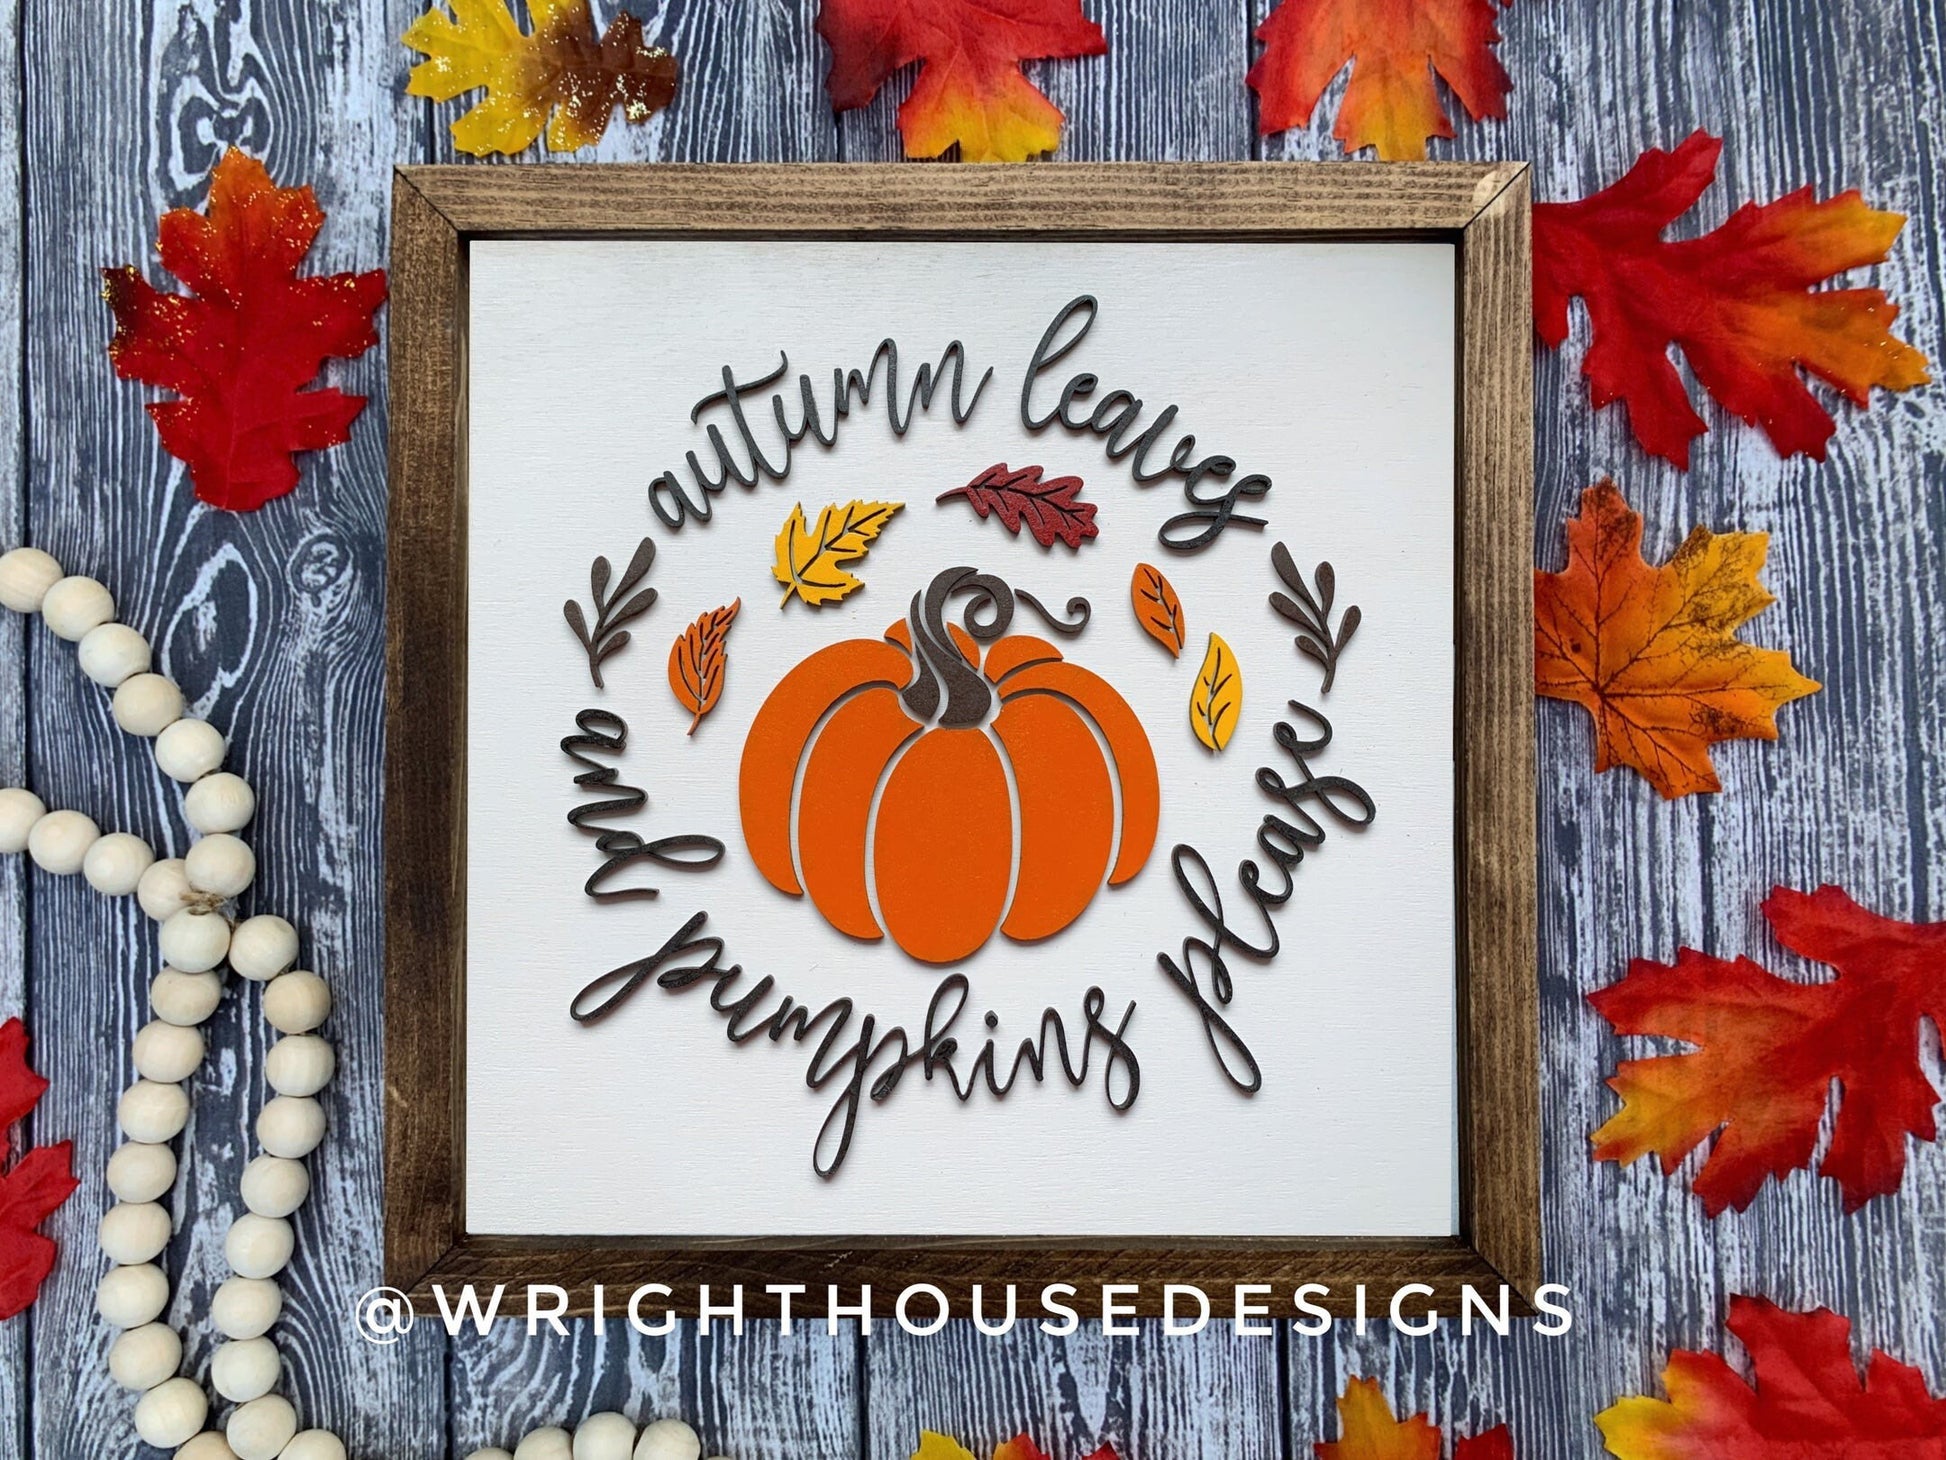 Autumn Leaves and Pumpkins Please - Wooden Coffee Bar Sign - Cottagecore Home and Kitchen Decor - Console Table Decor - Seasonal Wall Art